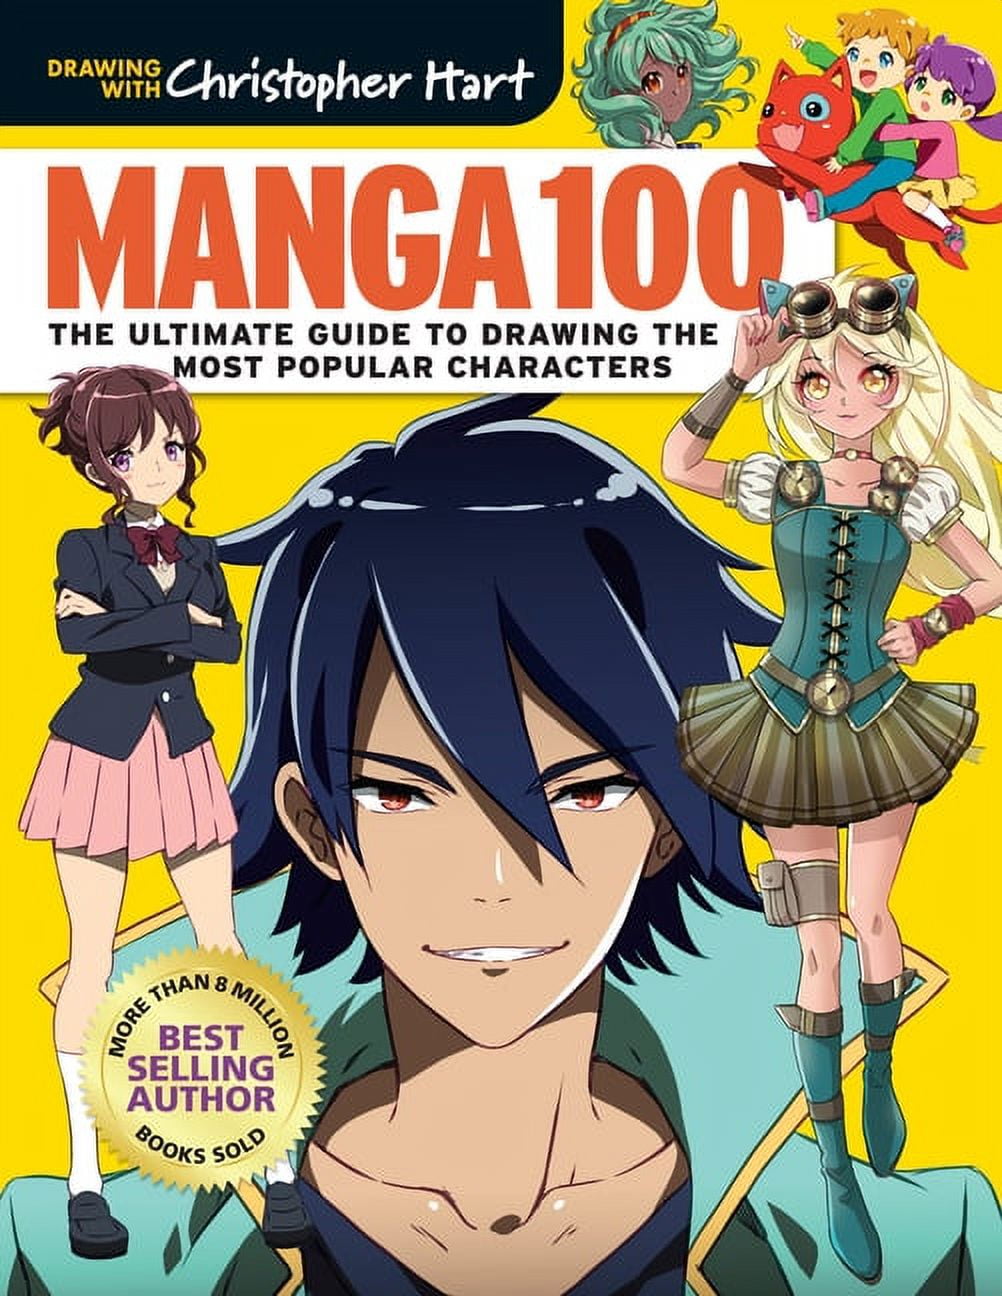 Manga 100: Manga 100 : The Ultimate Guide to Drawing the Most Popular ...